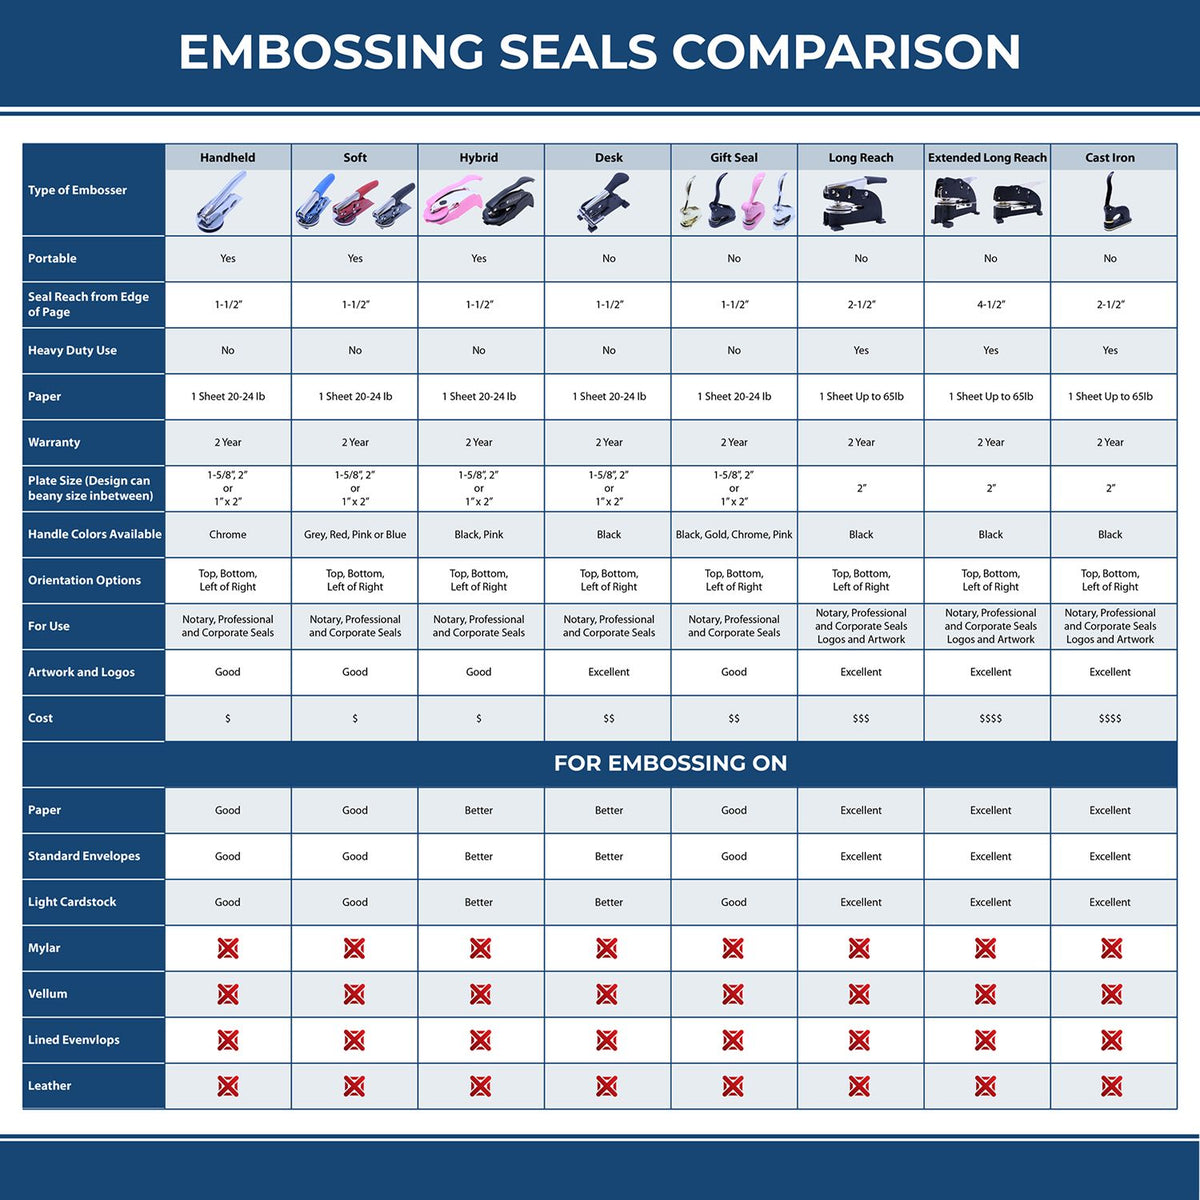 A comparison chart for the different types of mount models available for the Handheld Maine Professional Geologist Embosser